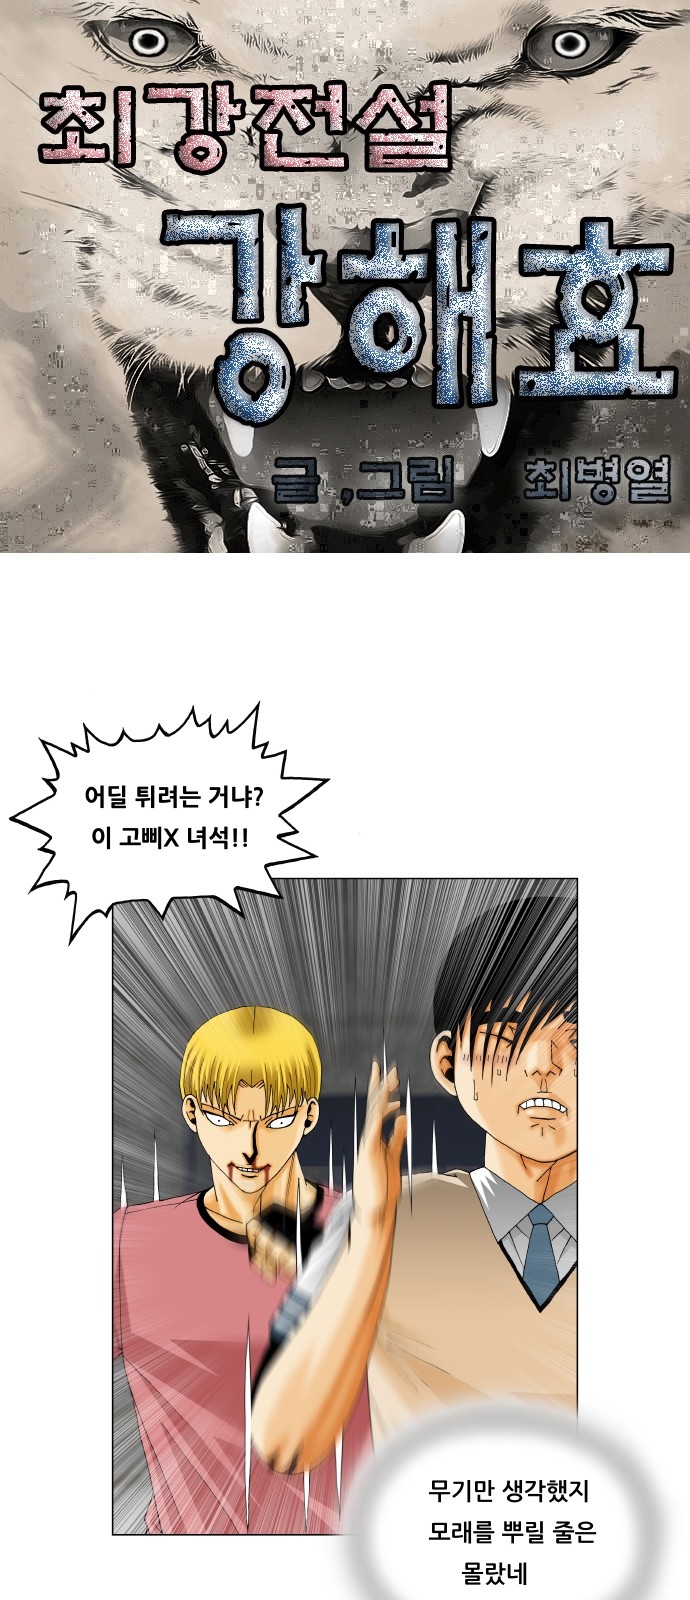 Ultimate Legend - Kang Hae Hyo - Chapter 308 - Page 1